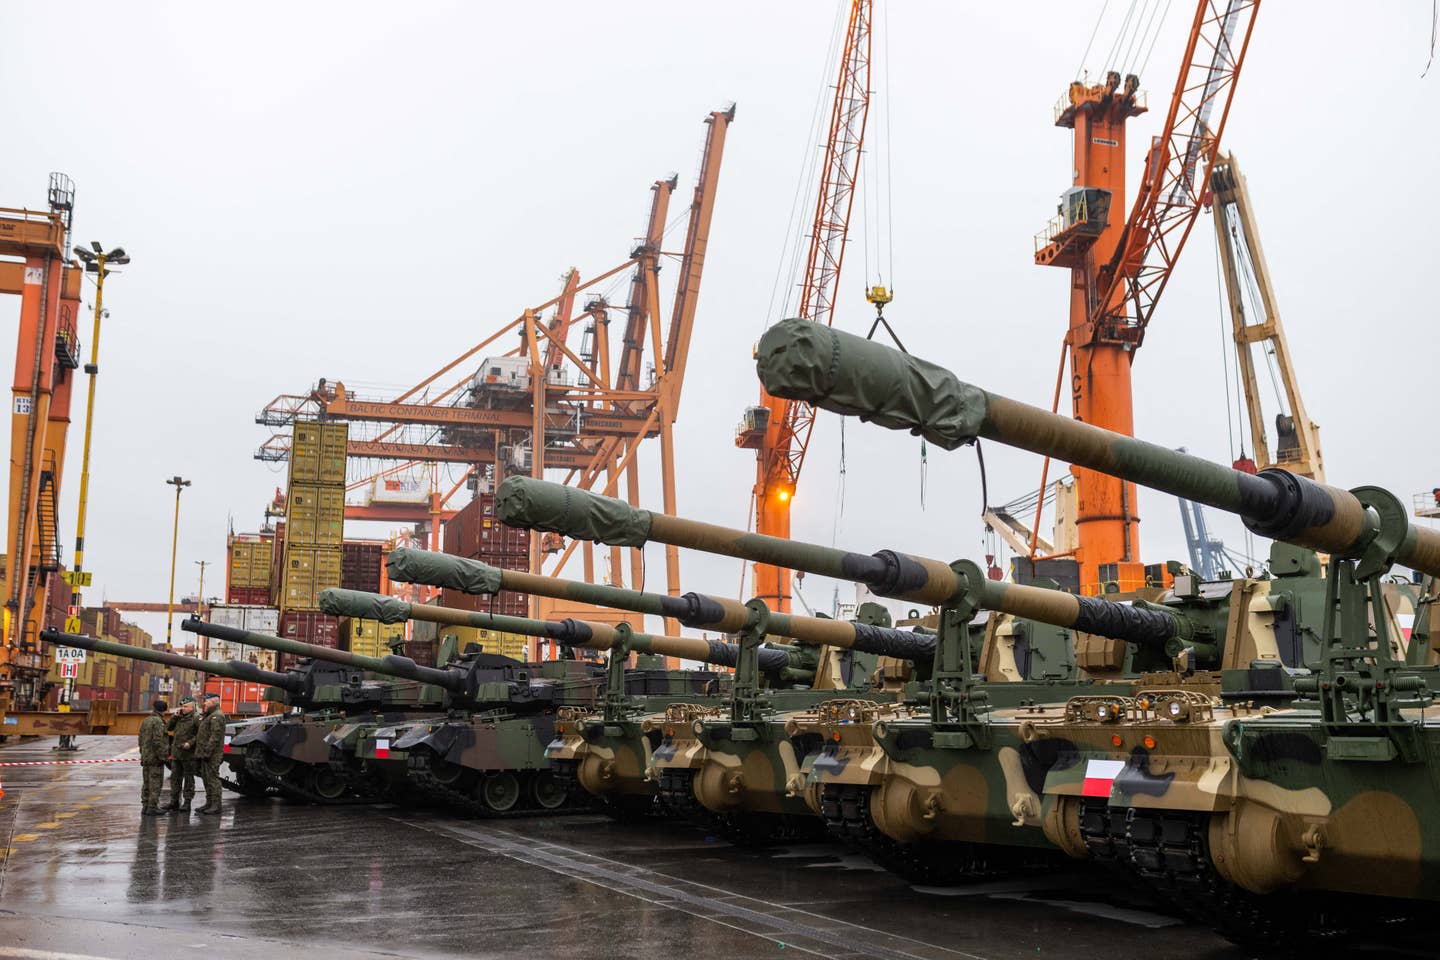 Polish Army soldiers stand in front of South Korea-made military equipment in the port of Gdynia, after the arrival of the first K2 tanks and K9 howitzers for Poland on December 6, 2022. <em>Photo by MATEUSZ SLODKOWSKI/AFP via Getty Images</em>